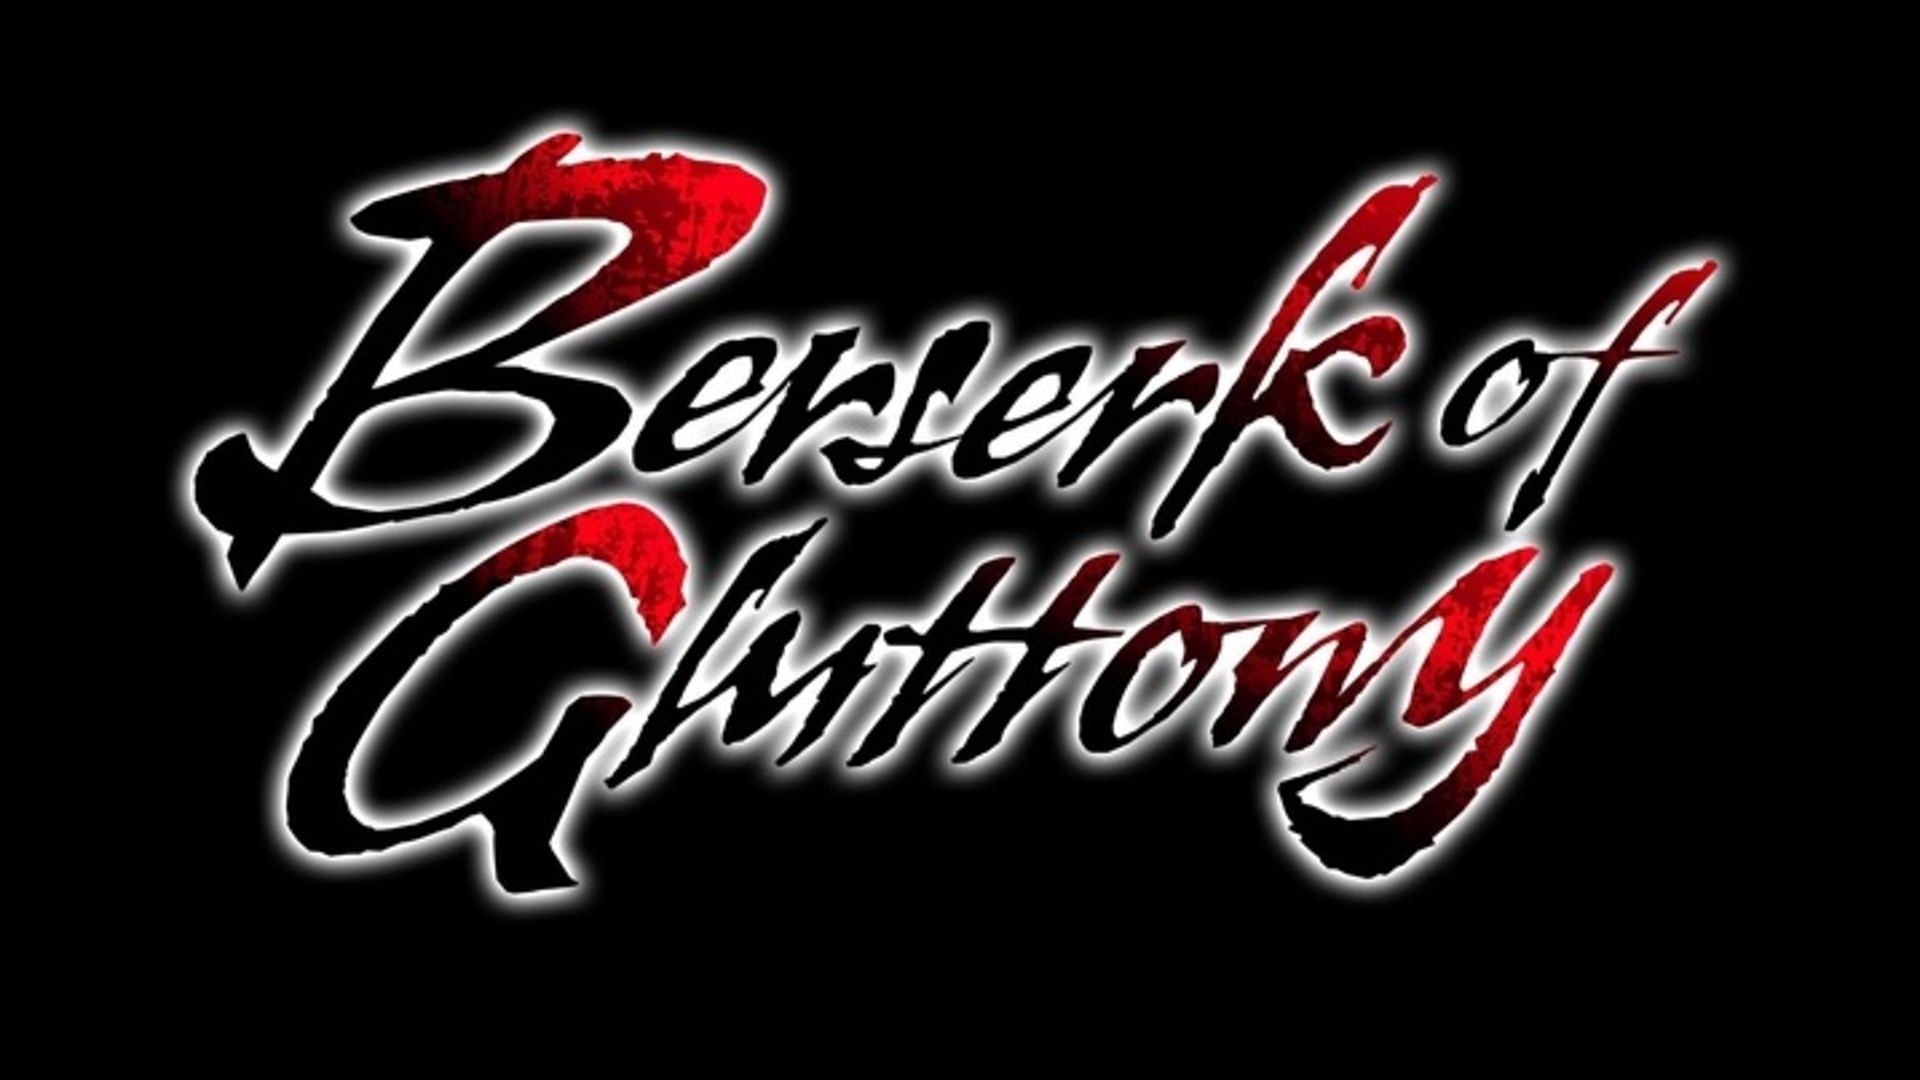 Berserk of Gluttony: Is it Reverence or Love that Fate feels